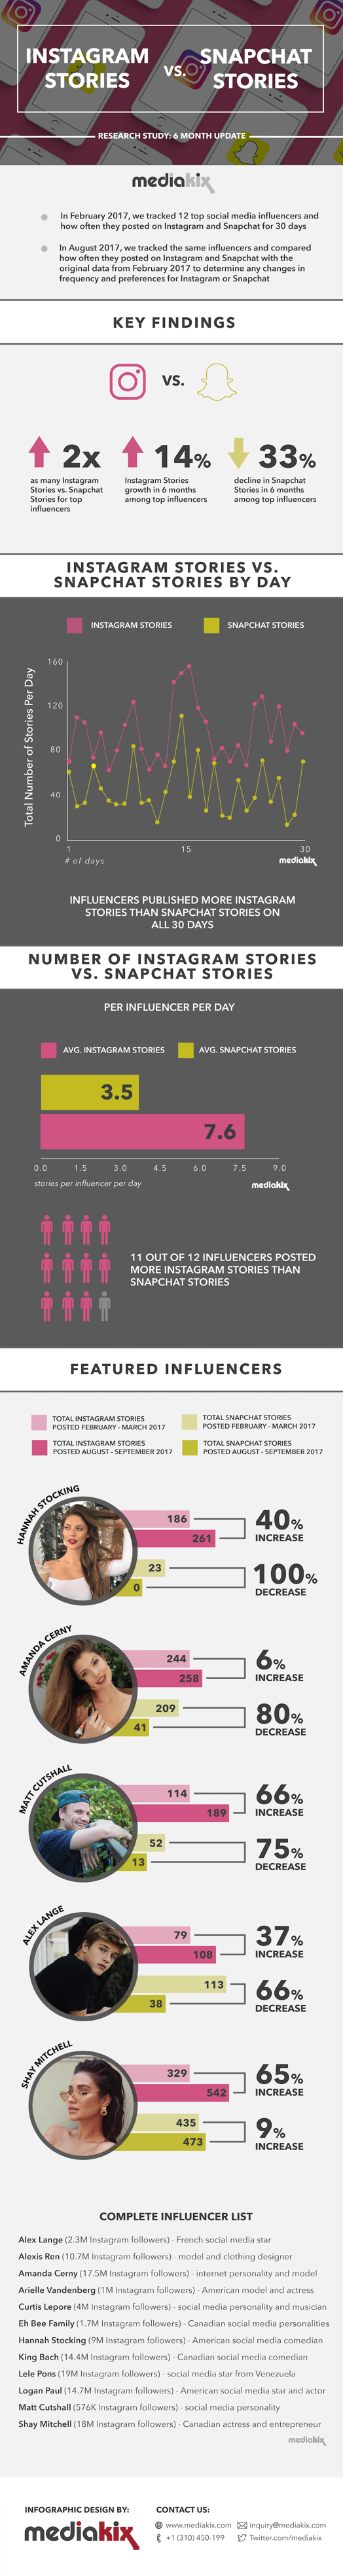 Instagram-Stories-vs-Snapchat-Stories-Top-Influencers-Infographic1.png